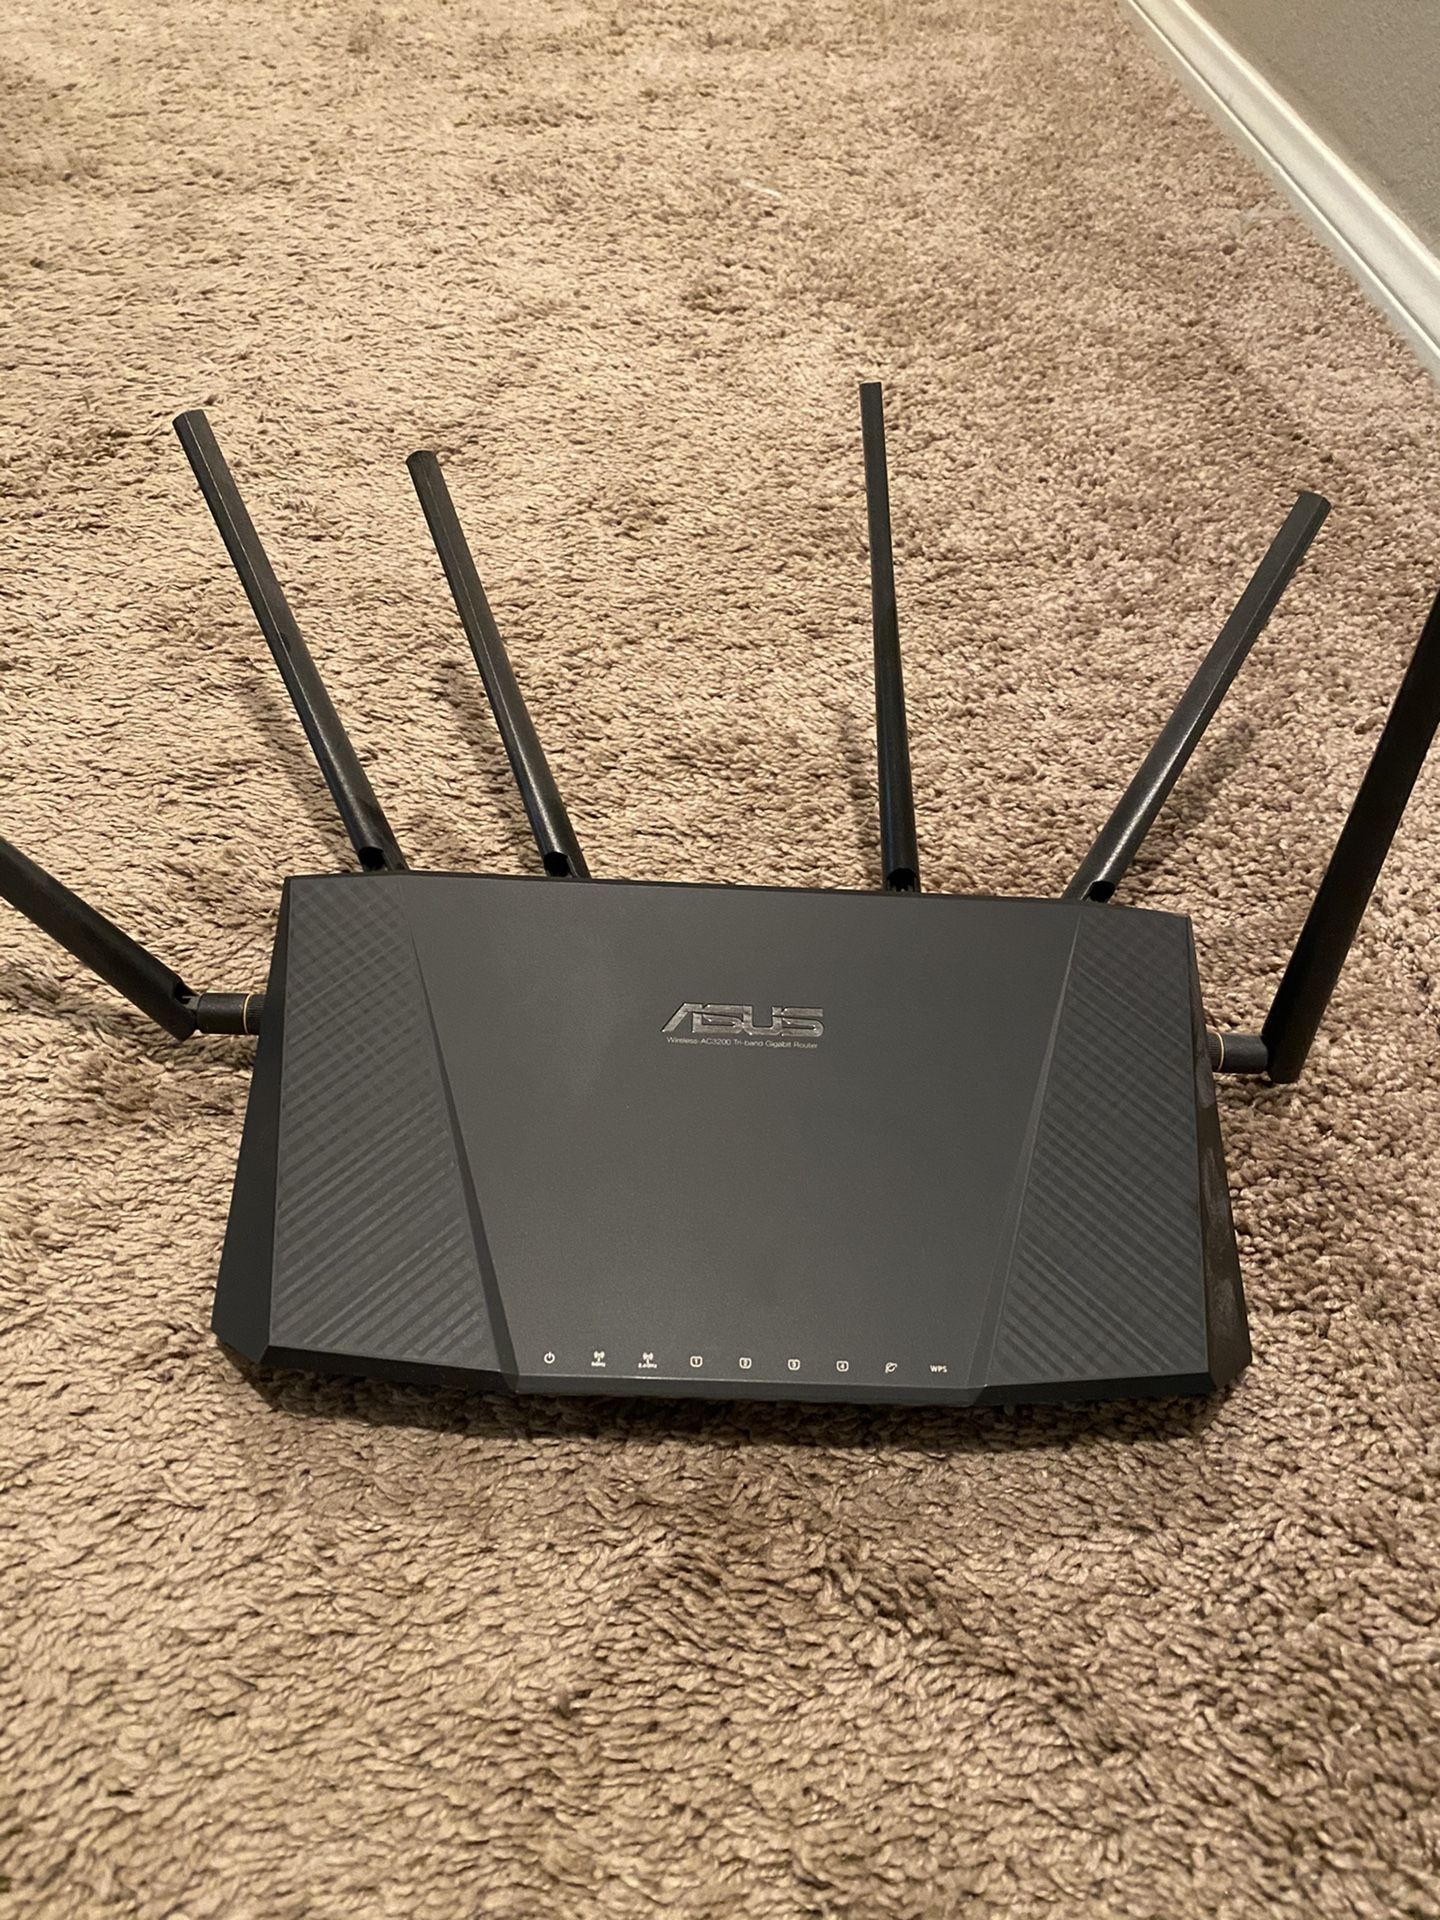 Asus AC3200 wireless router